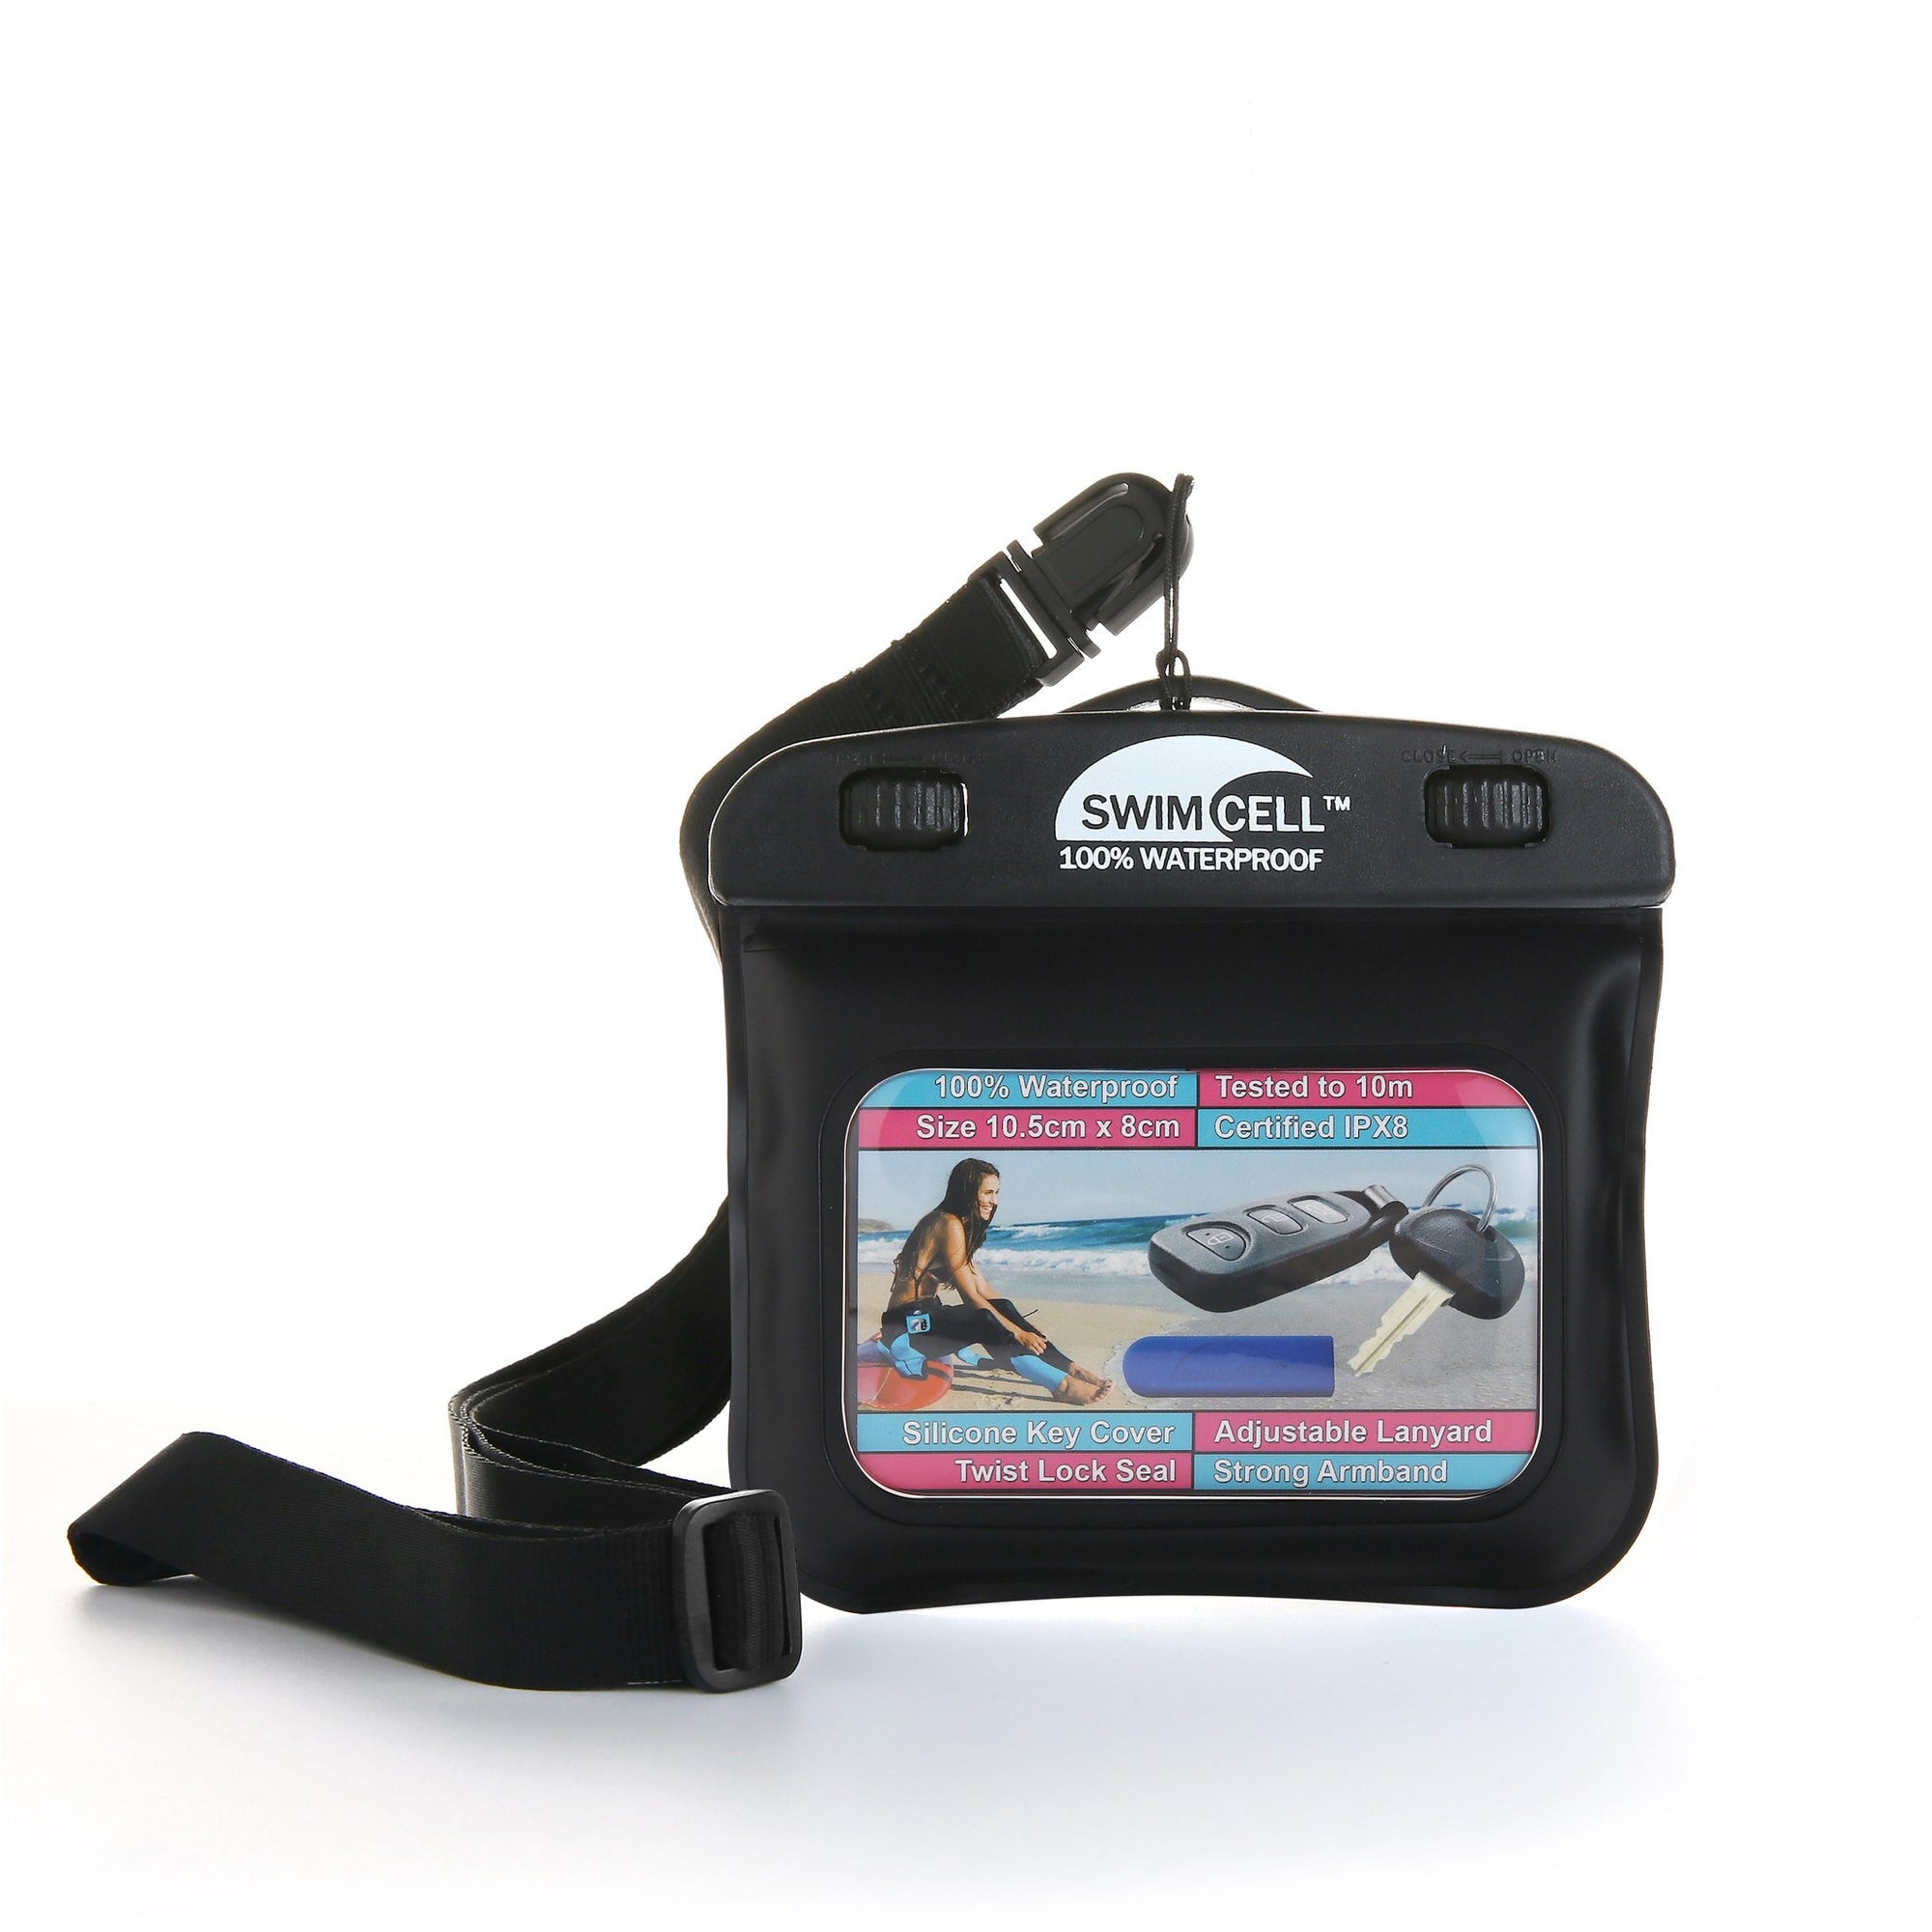 SwimCell waterproof pouch for key and money